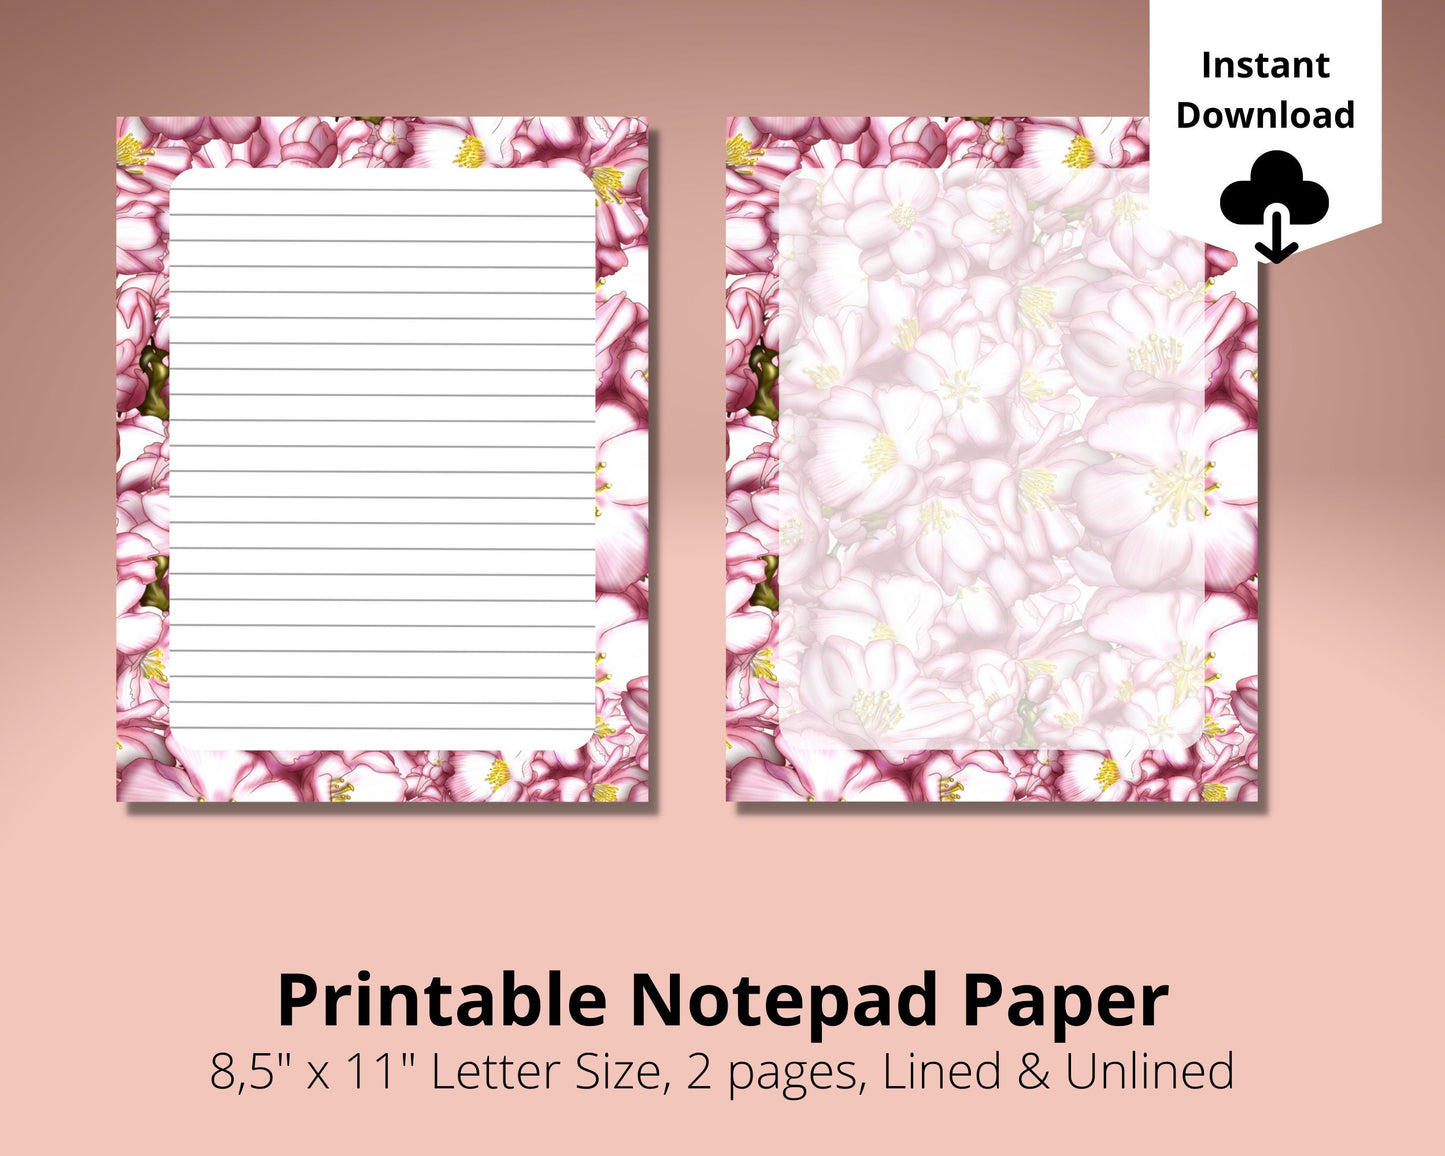 Printable Cherry Blossom Stationery Paper Lined and Unlined